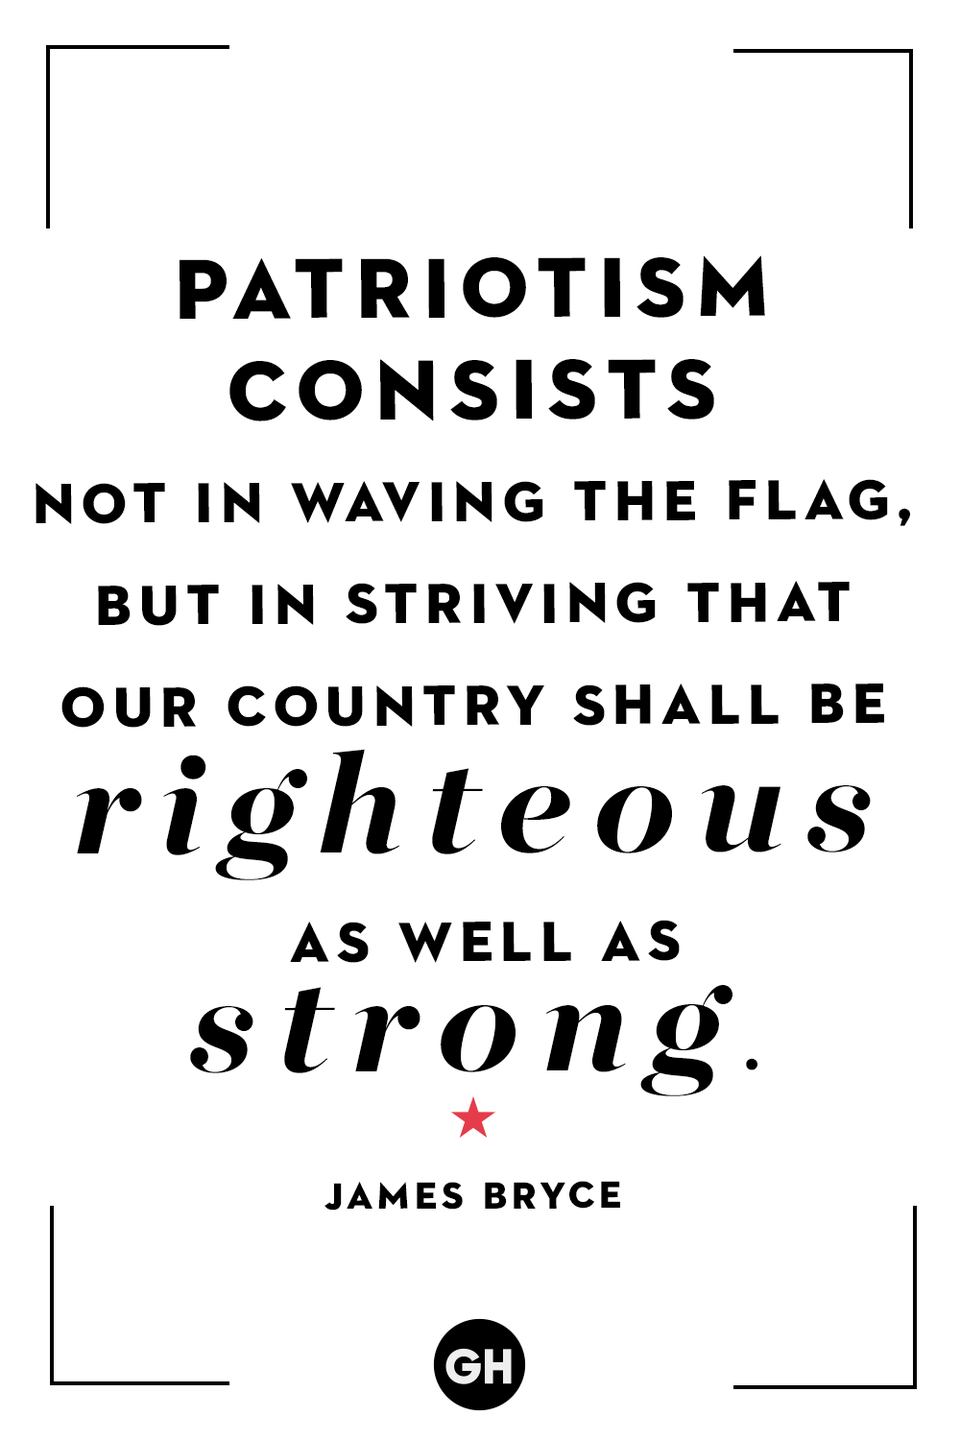 <p>Patriotism consists not in waving the flag, but in striving that our country shall be righteous as well as strong.</p>